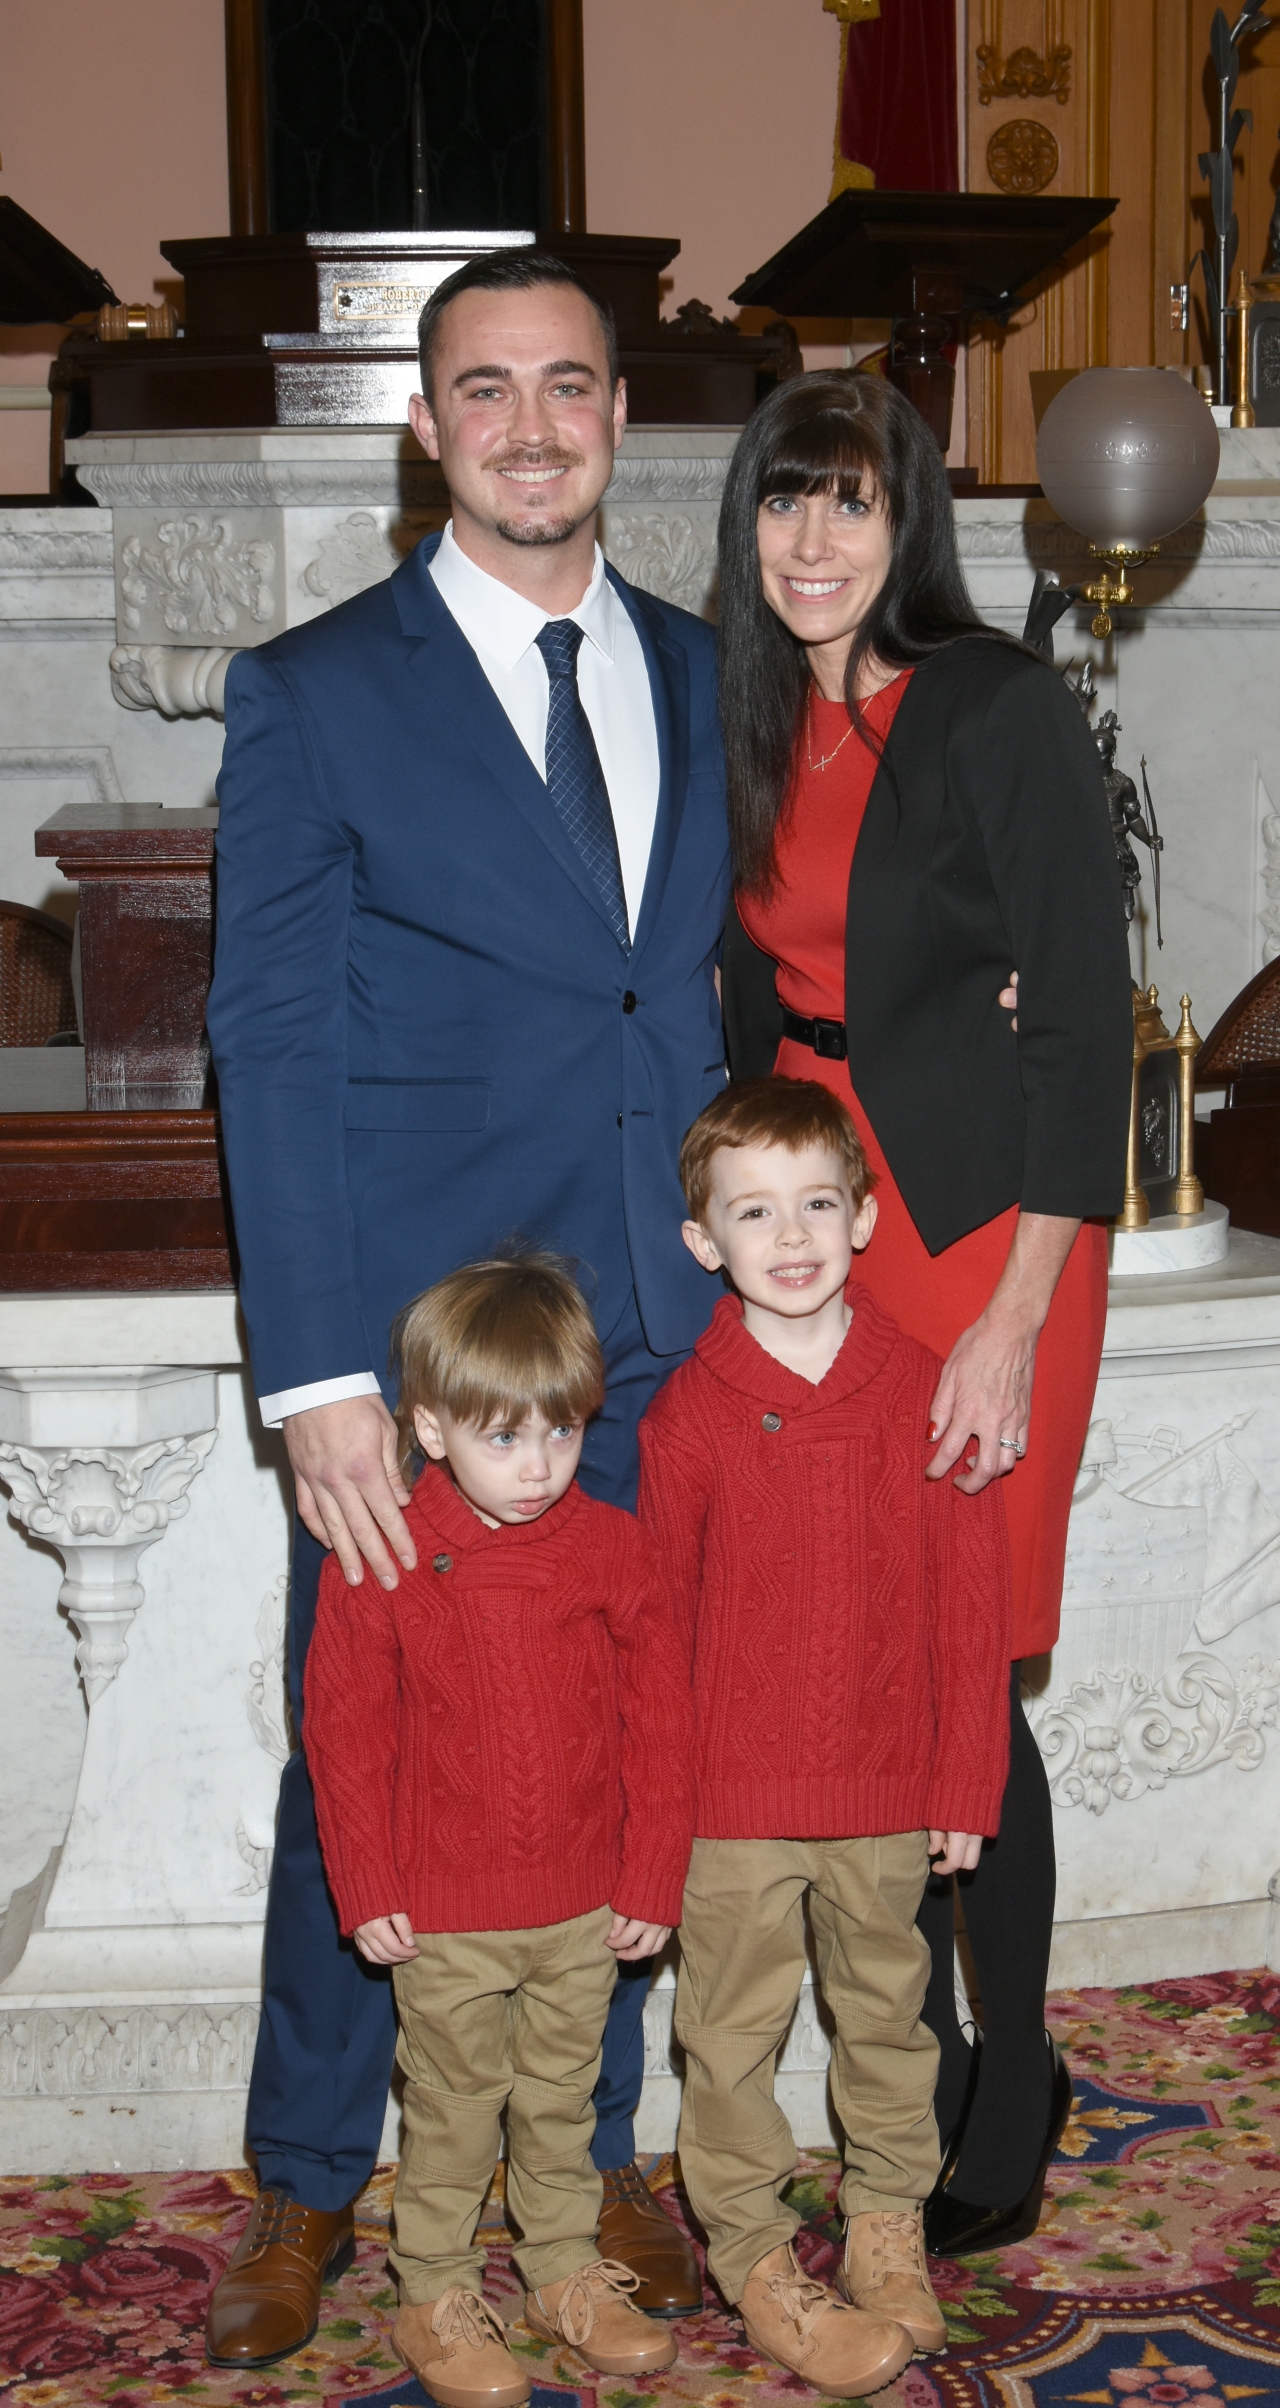 State Rep. Mike Loychik joins his family during his swearing-in ceremony